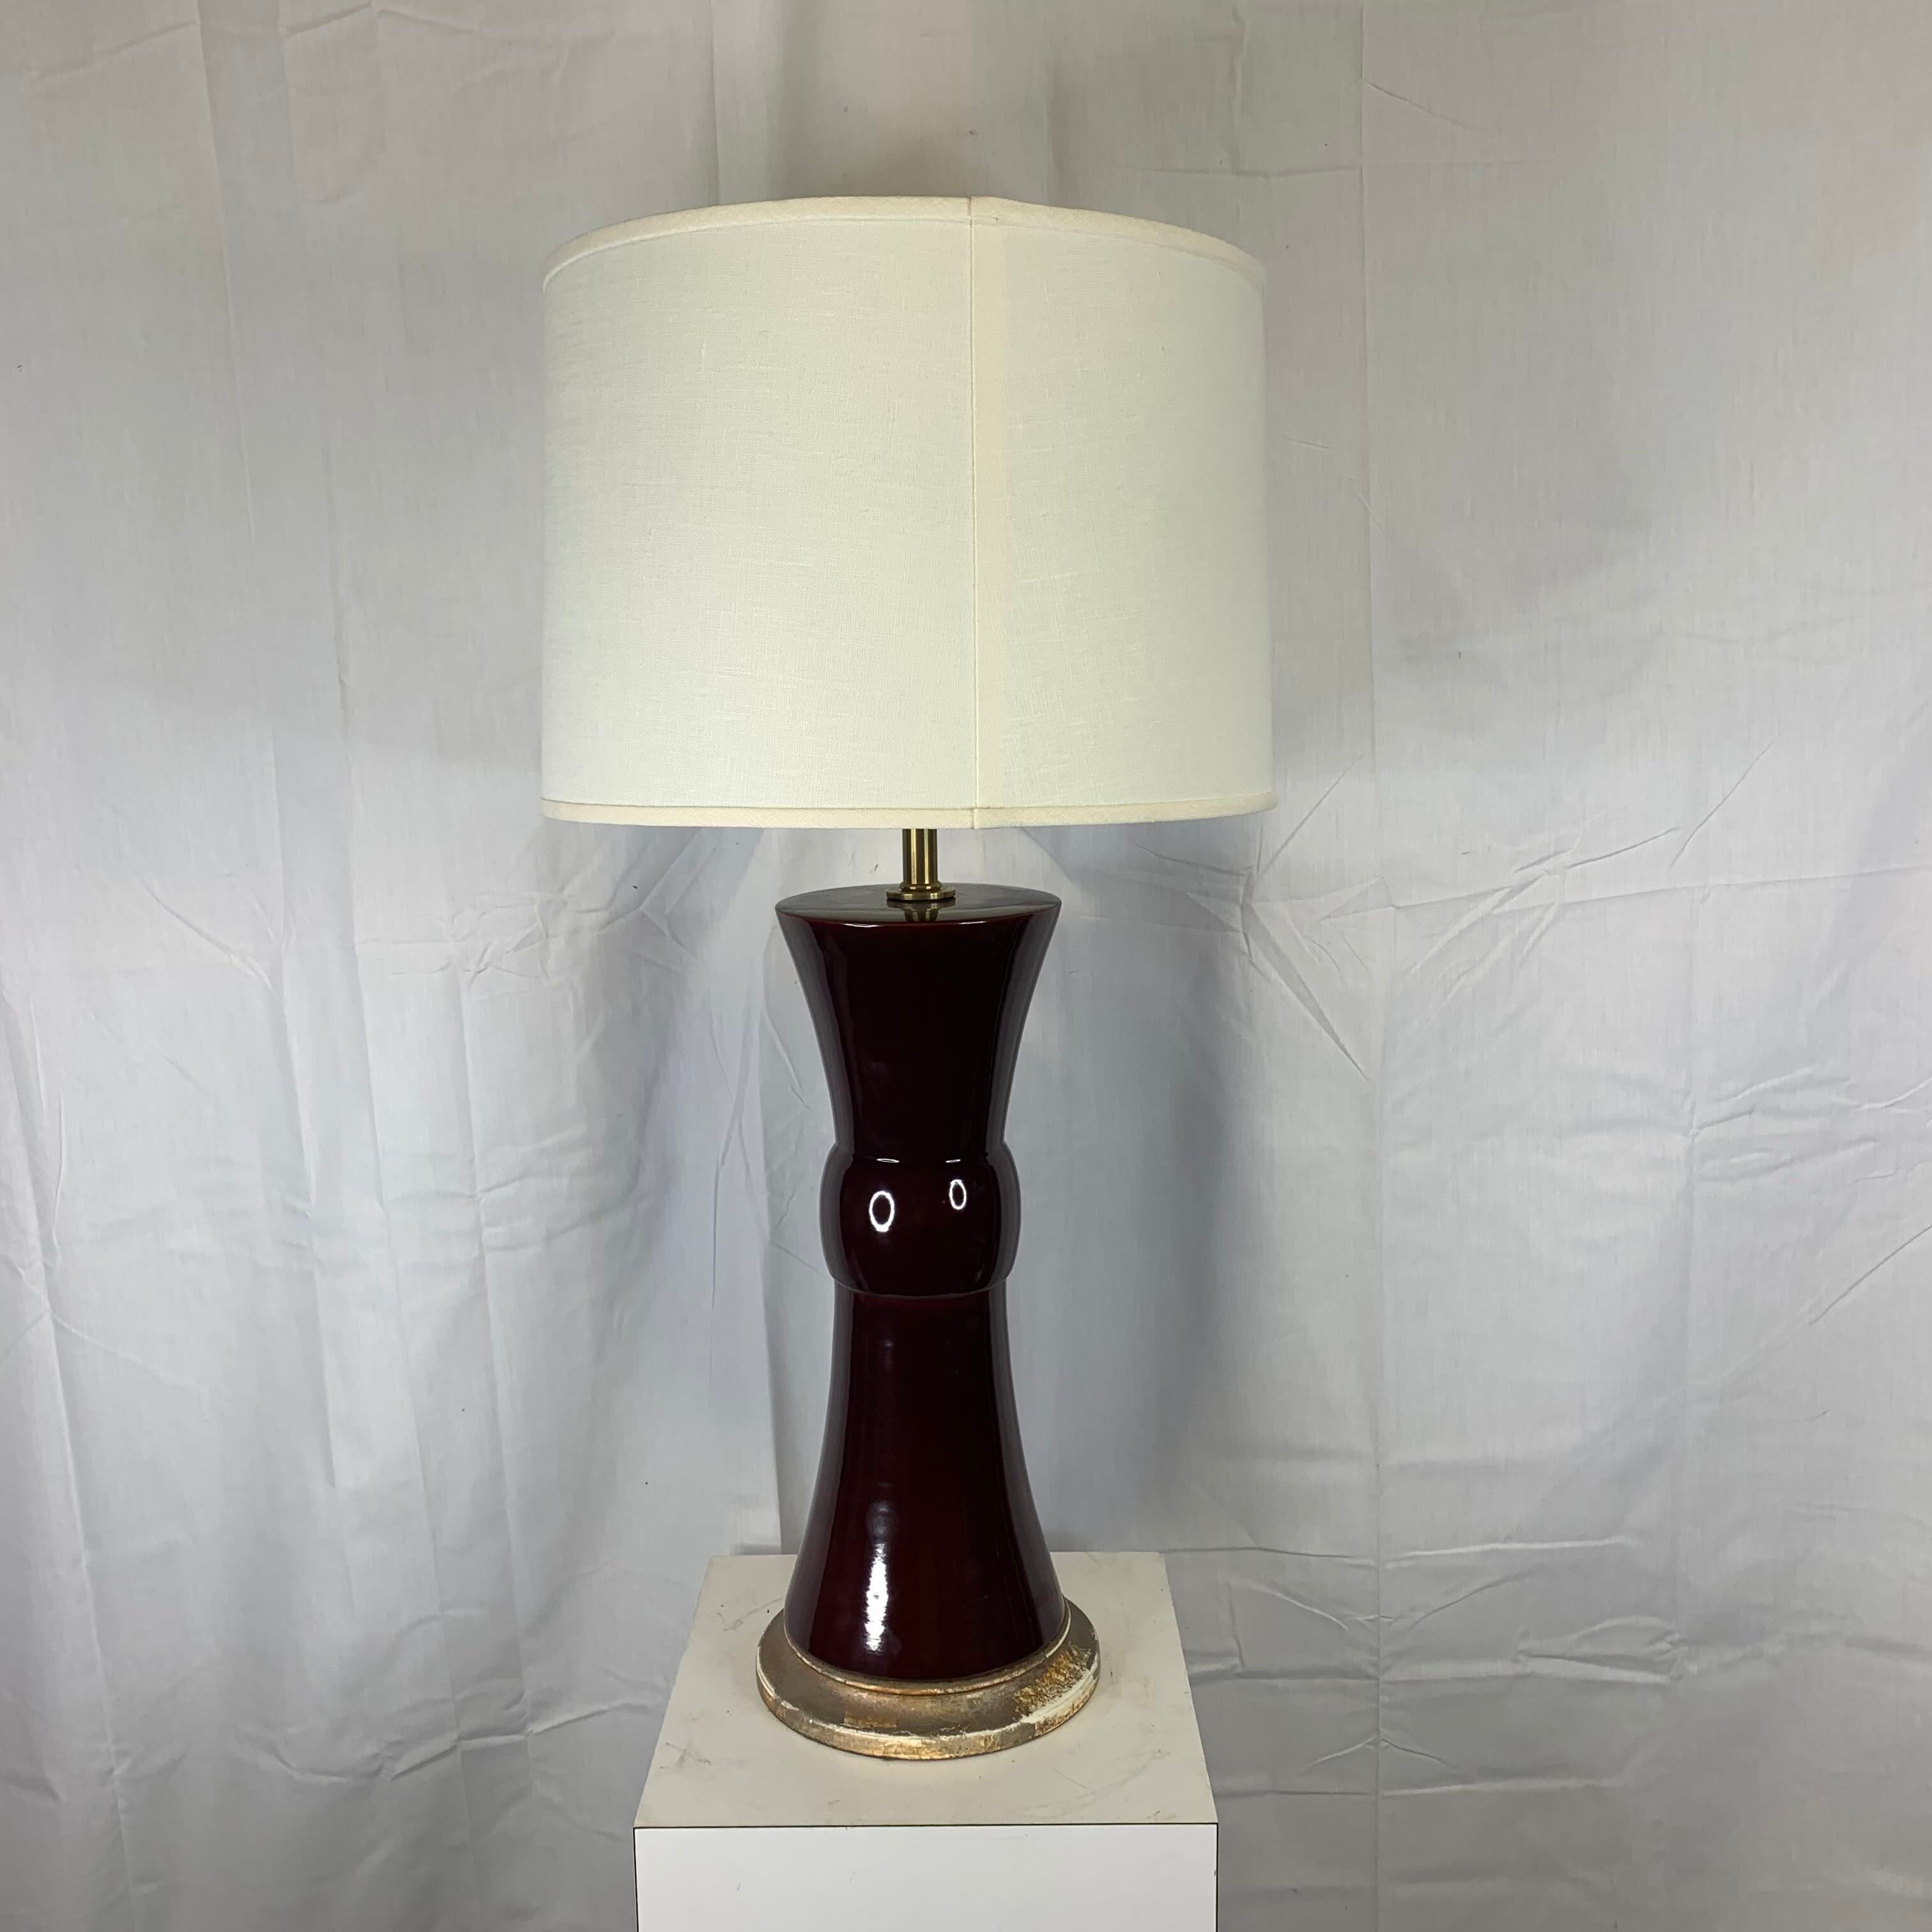 16" Diameter x 32" Red Ceramic Hourglass Style with Shade Table Lamp